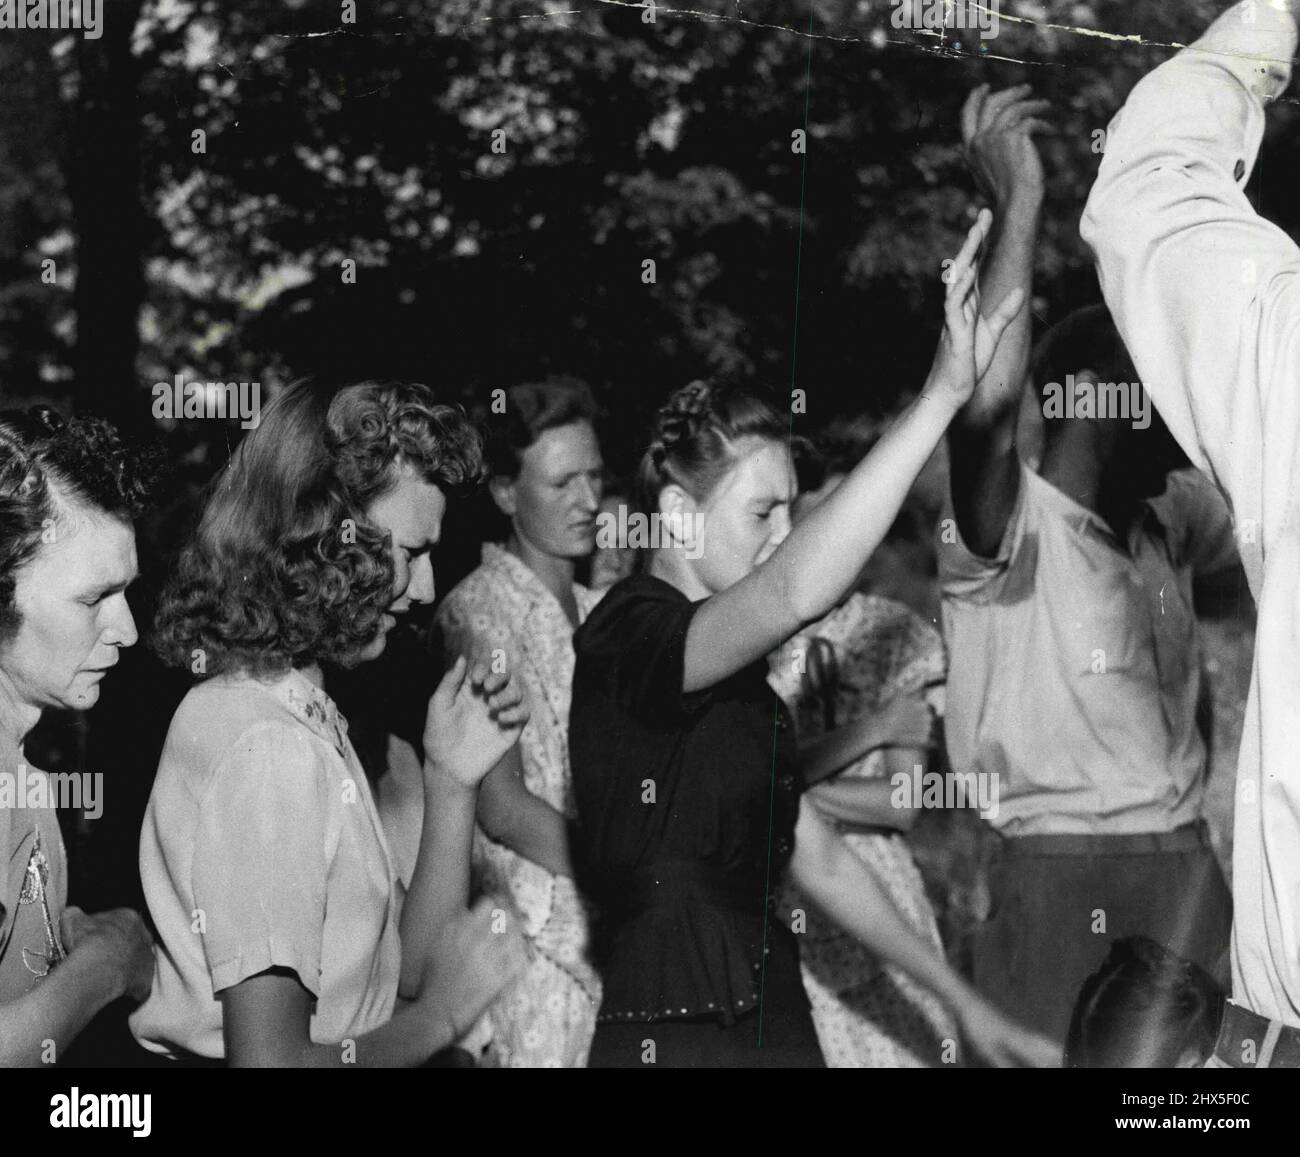 Us hill-billy sect of Holiness Faith-healers in Tennessee beginning to dance with hysteria. Cultists plunge their hands into flames to show their faith. Once this sect used to pass round deadly snakes until this was banned by law. November 18, 1952. Stock Photo